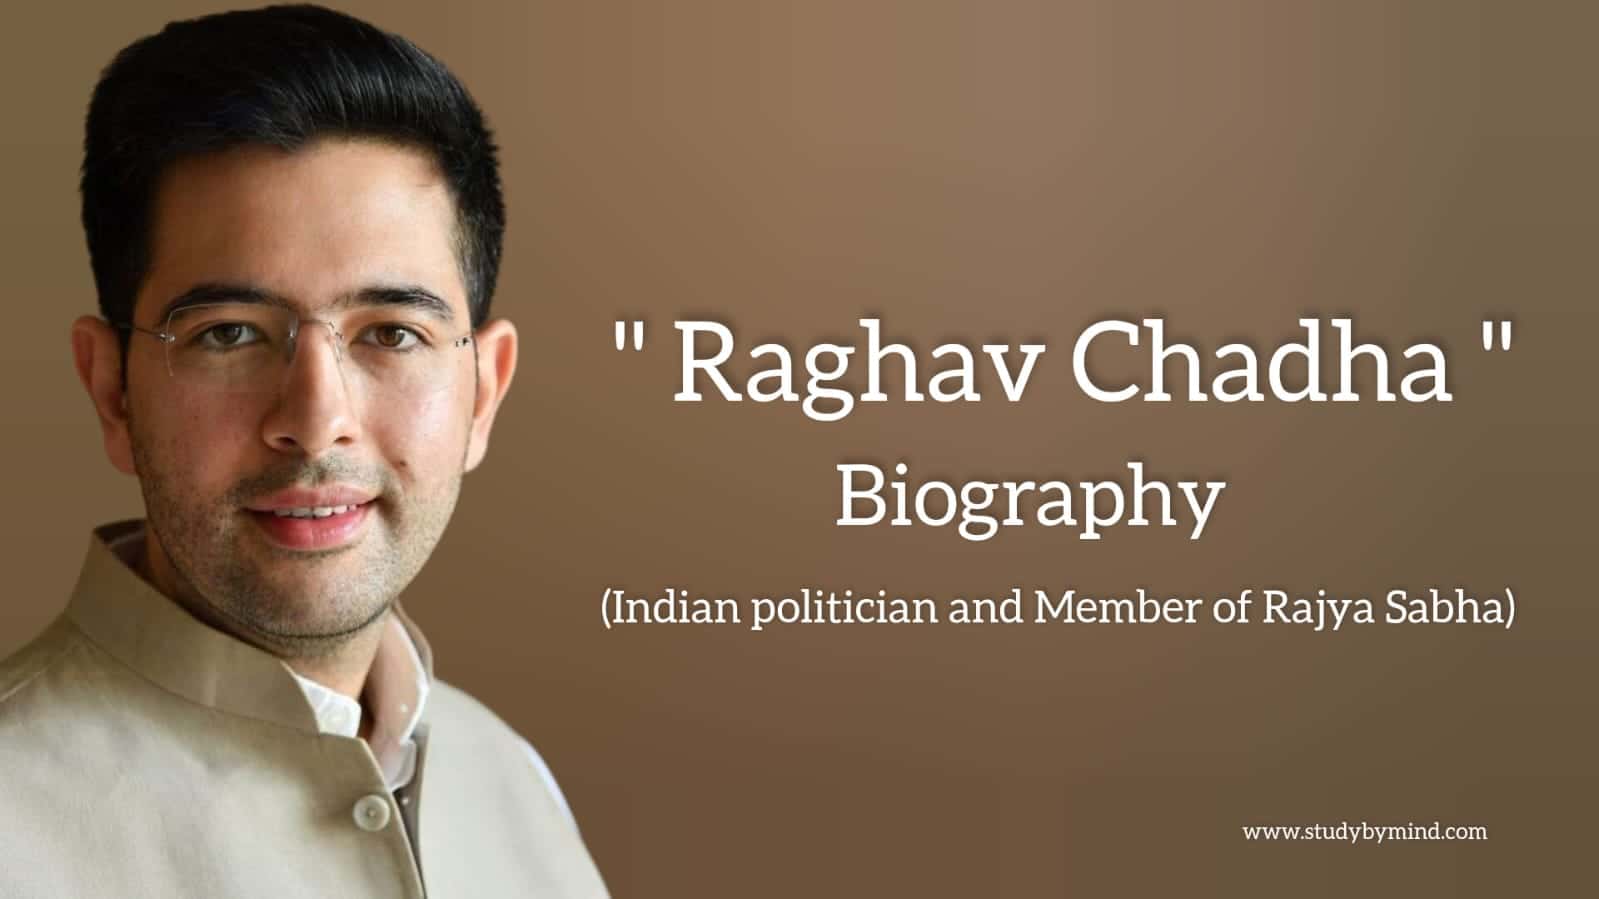 You are currently viewing Raghav Chadha biography in english (Indian Politician and Member of Rajya Sabha), Aam Aadmi Party